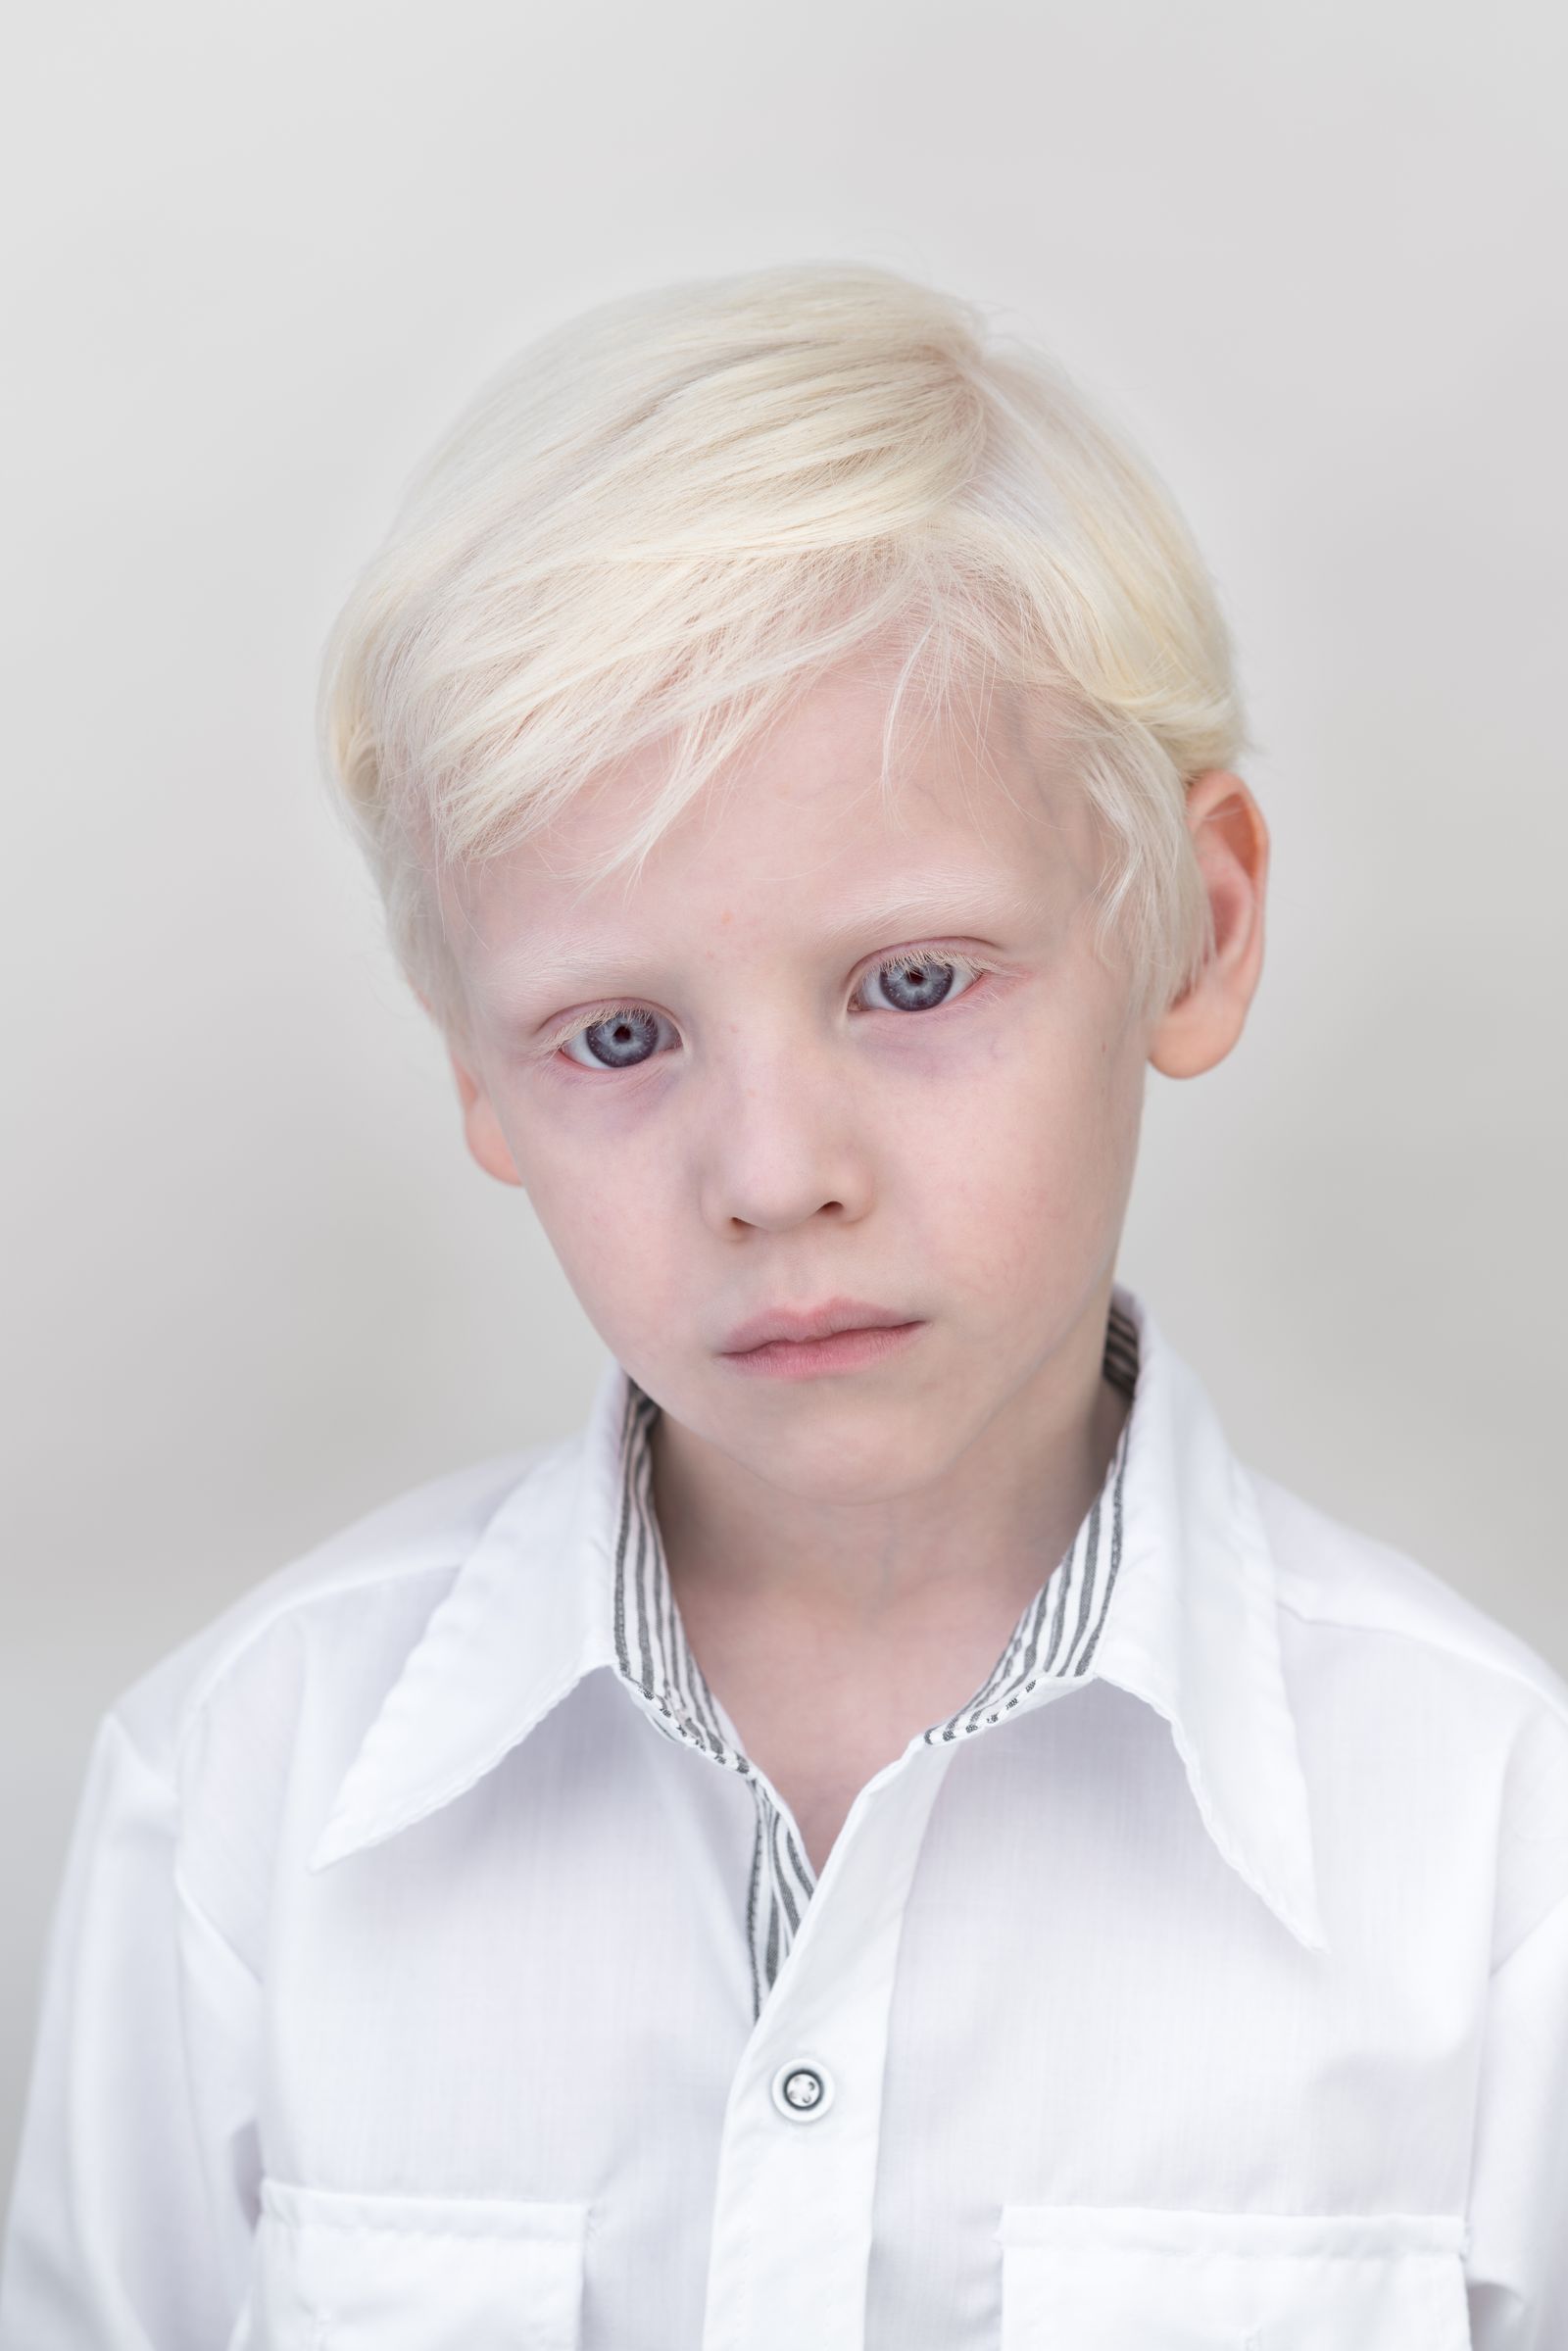 © Jorge Monaco - Image from the ALBINOS, BEING DIFFERENT photography project